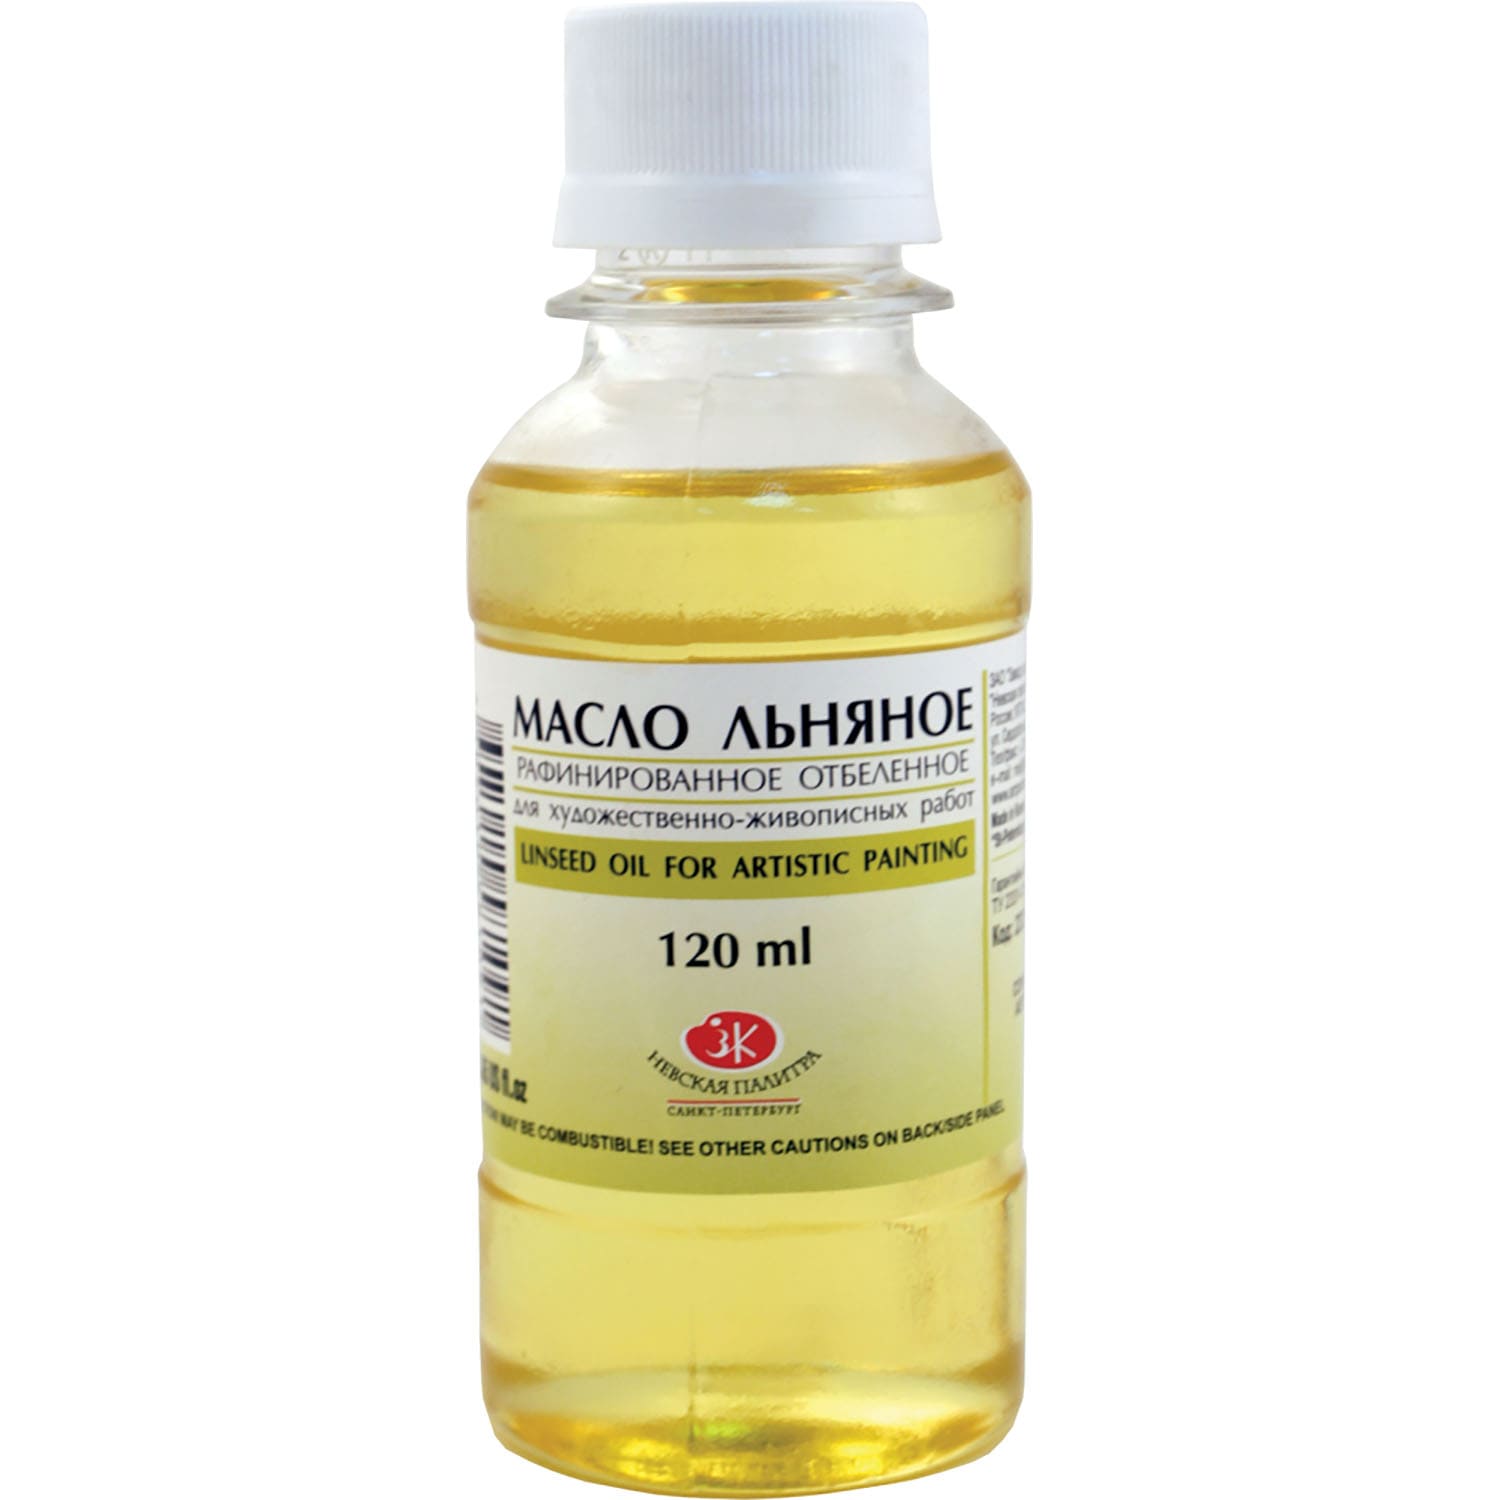 Refined linseed oil for painting, 120 ml